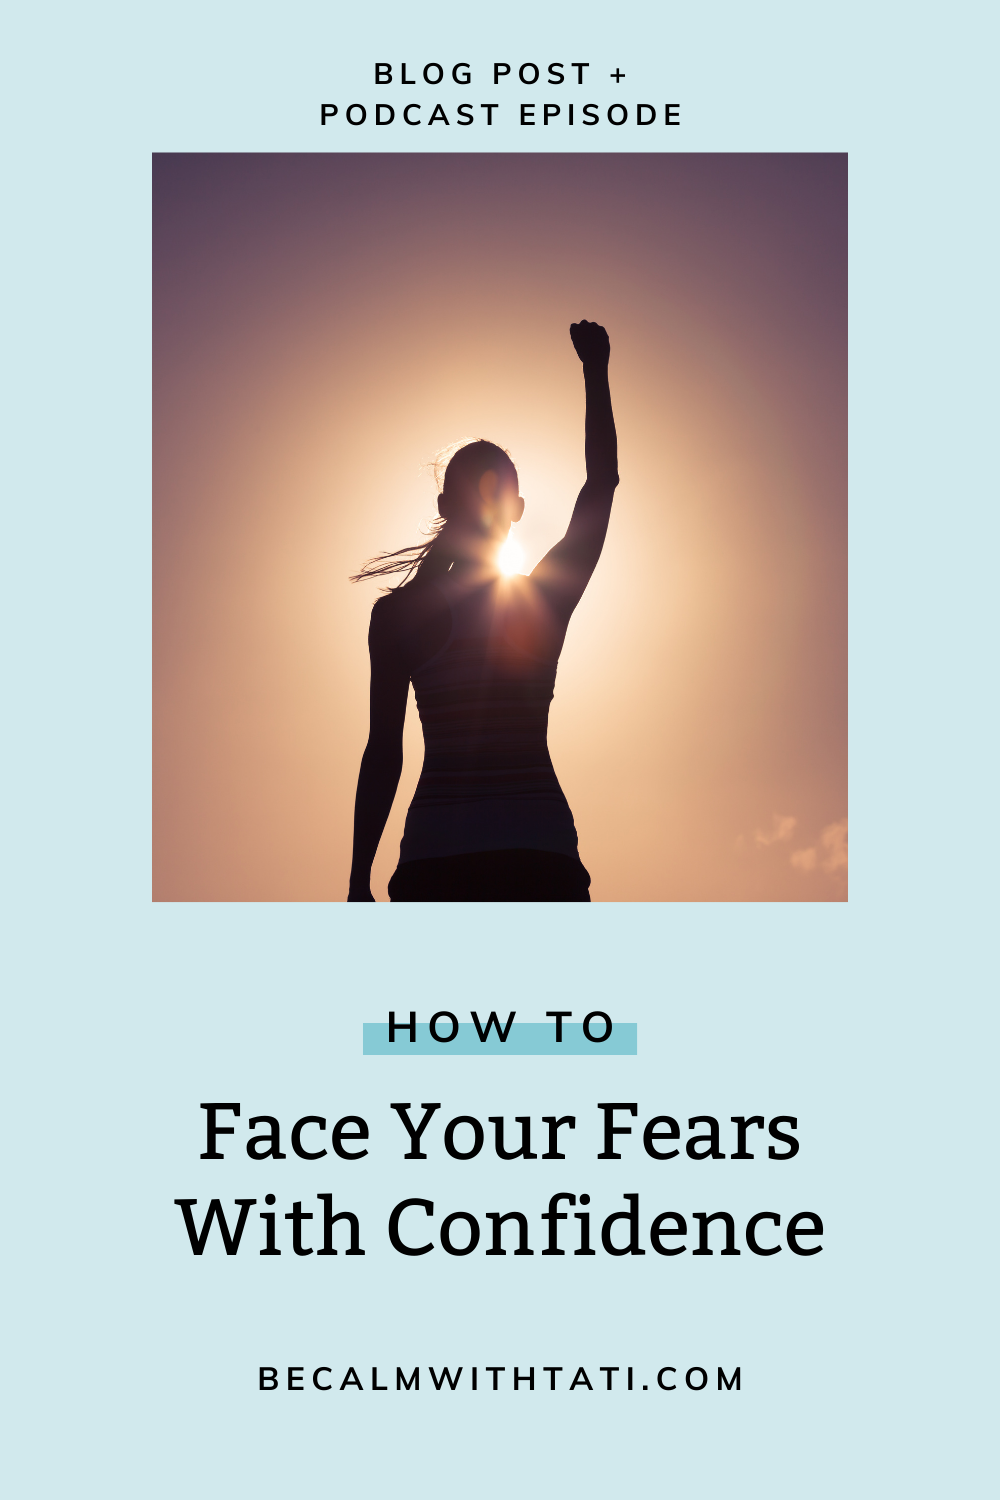 How To Face Your Fears With Confidence